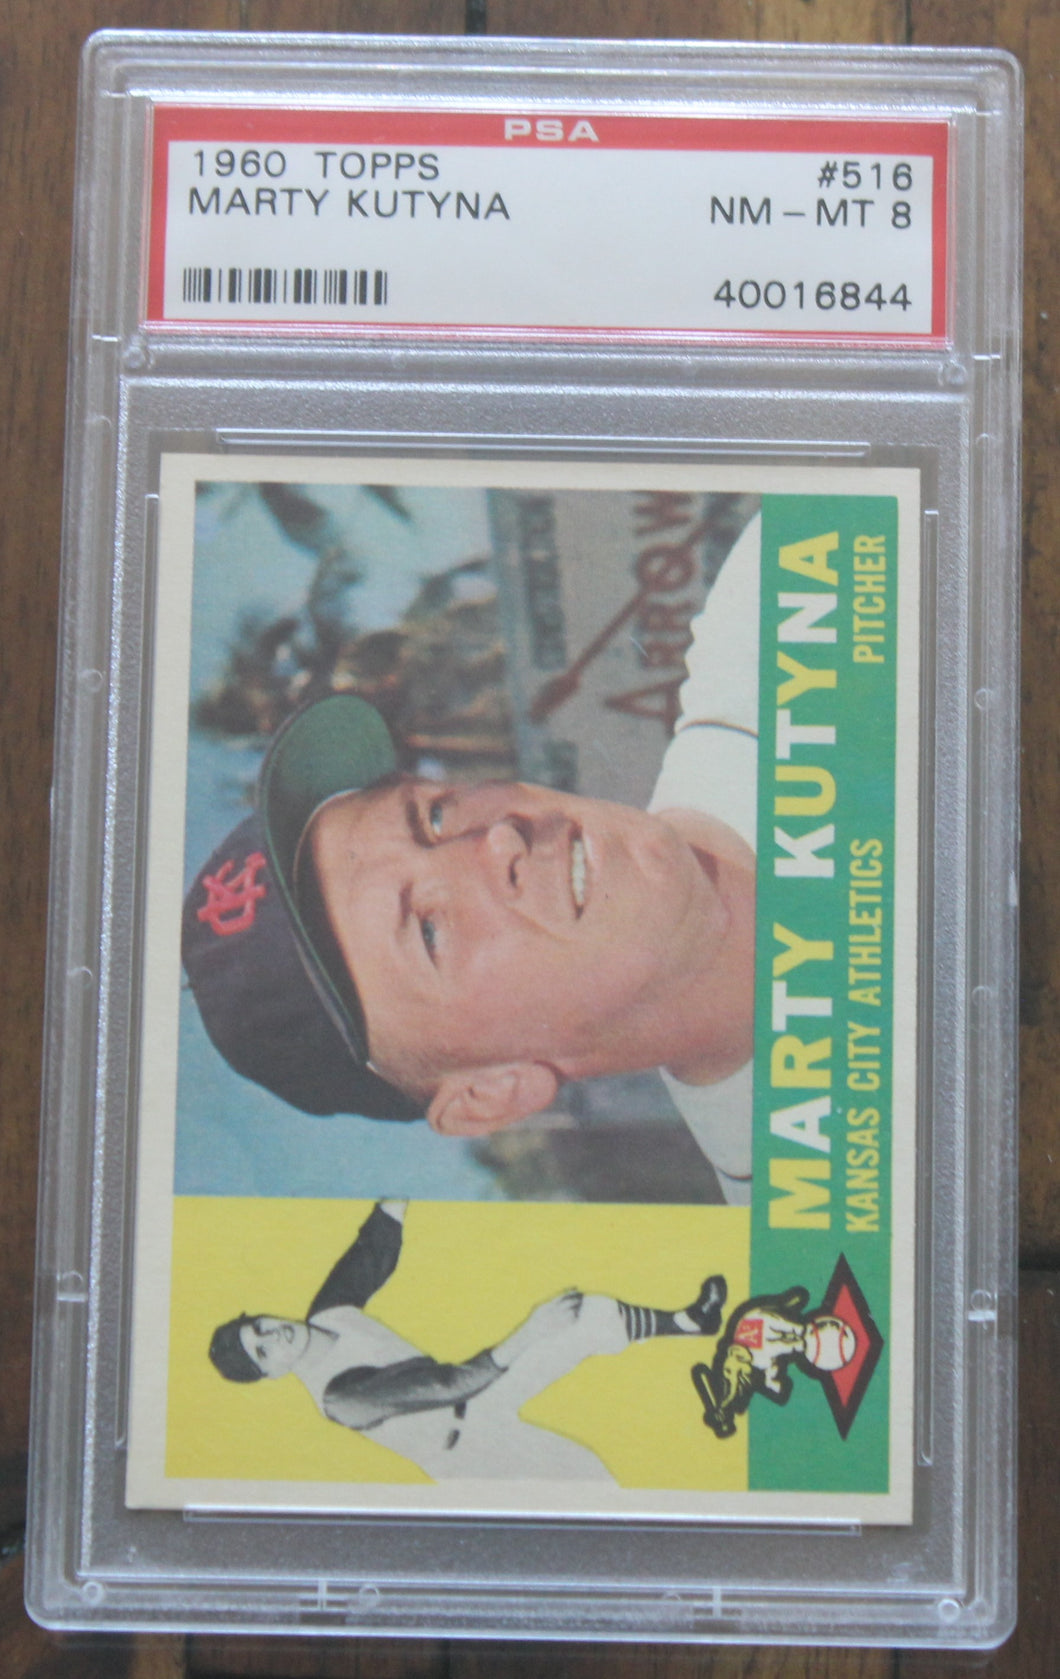 1960 Topps Marty Kutyna #516 PSA NM-MT 8